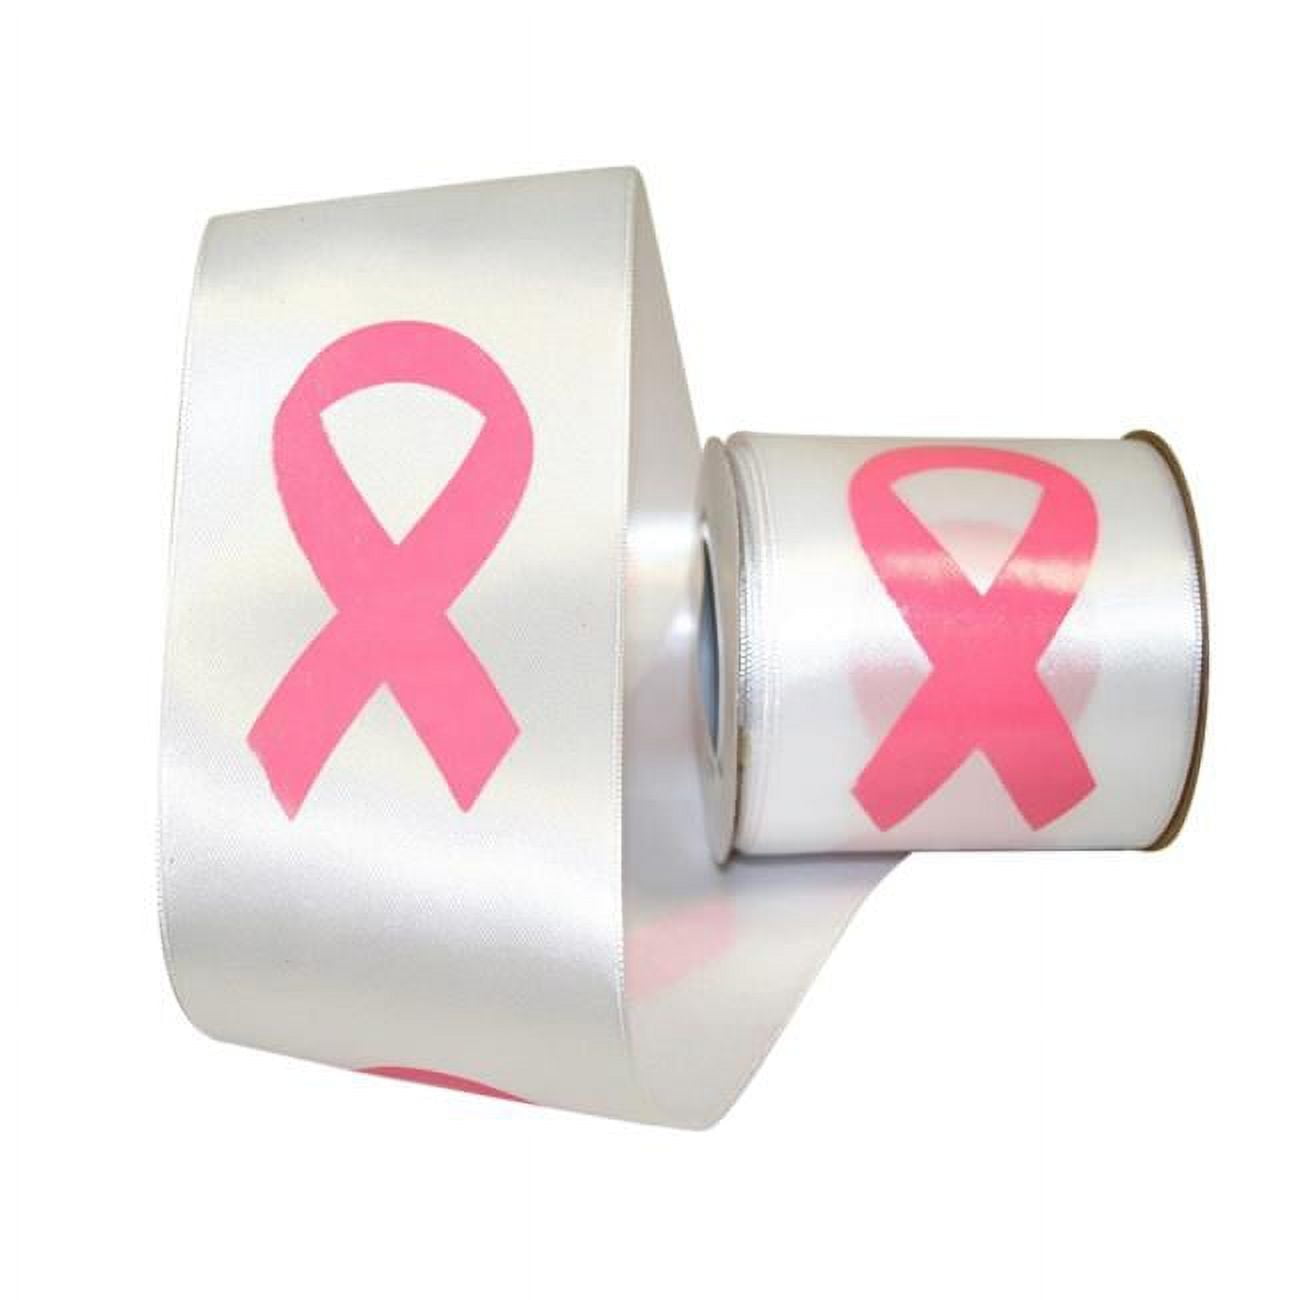 Reliant Ribbon - 4961-030-40F, Breast Cancer Awareness Ribbon Dfs Ribbon,  White, 2-1/2 Inch, 10 Yards 